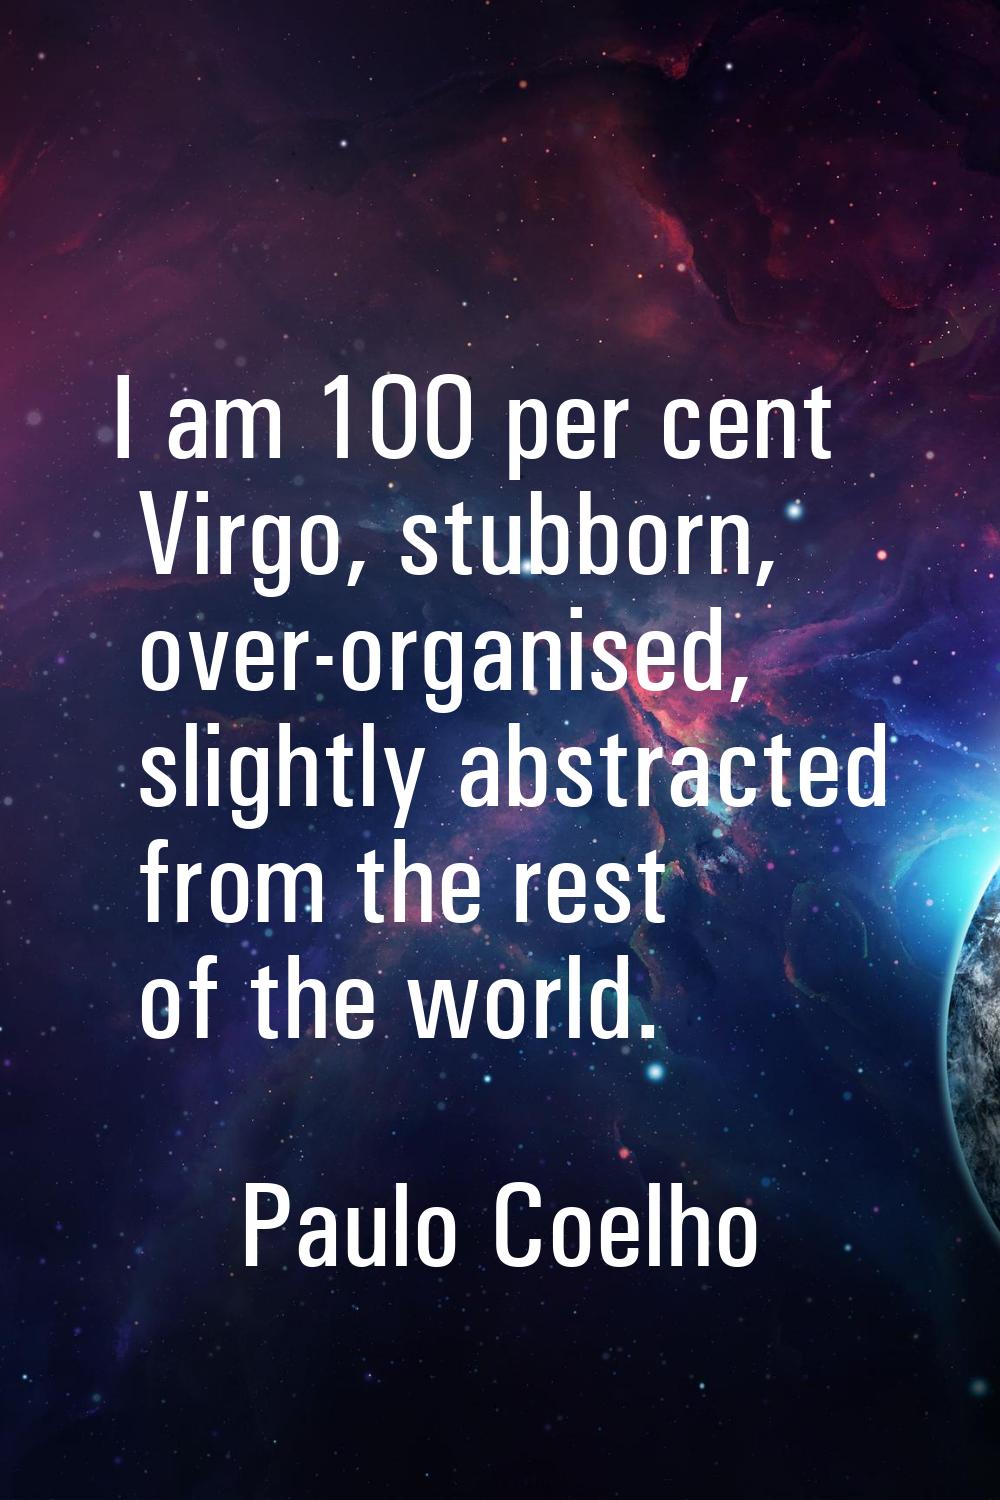 I am 100 per cent Virgo, stubborn, over-organised, slightly abstracted from the rest of the world.